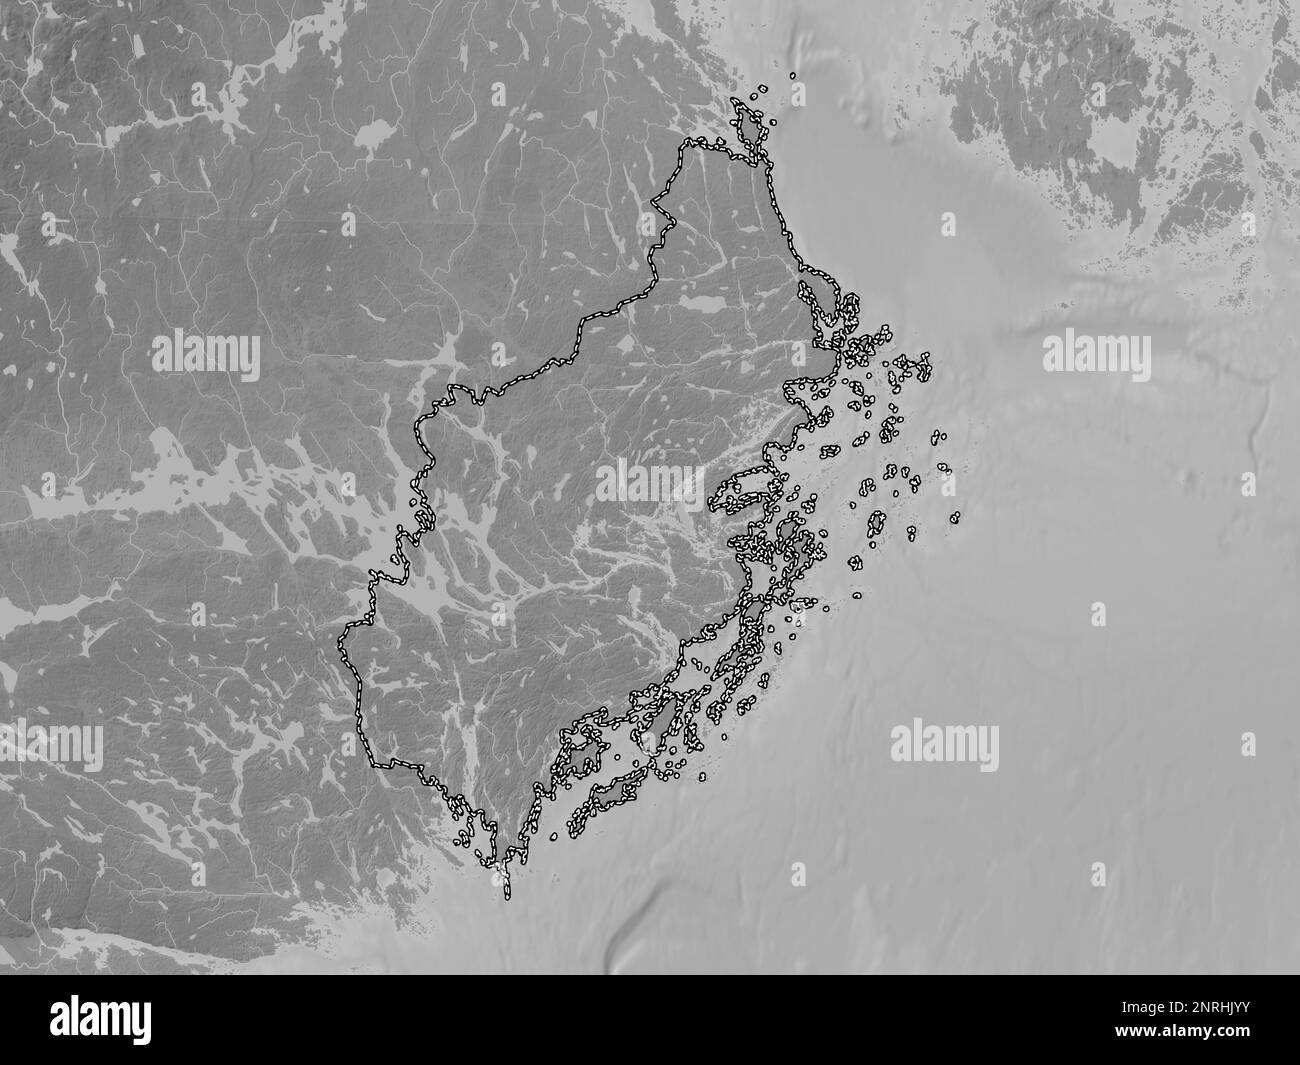 Stockholm, county of Sweden. Grayscale elevation map with lakes and rivers Stock Photo